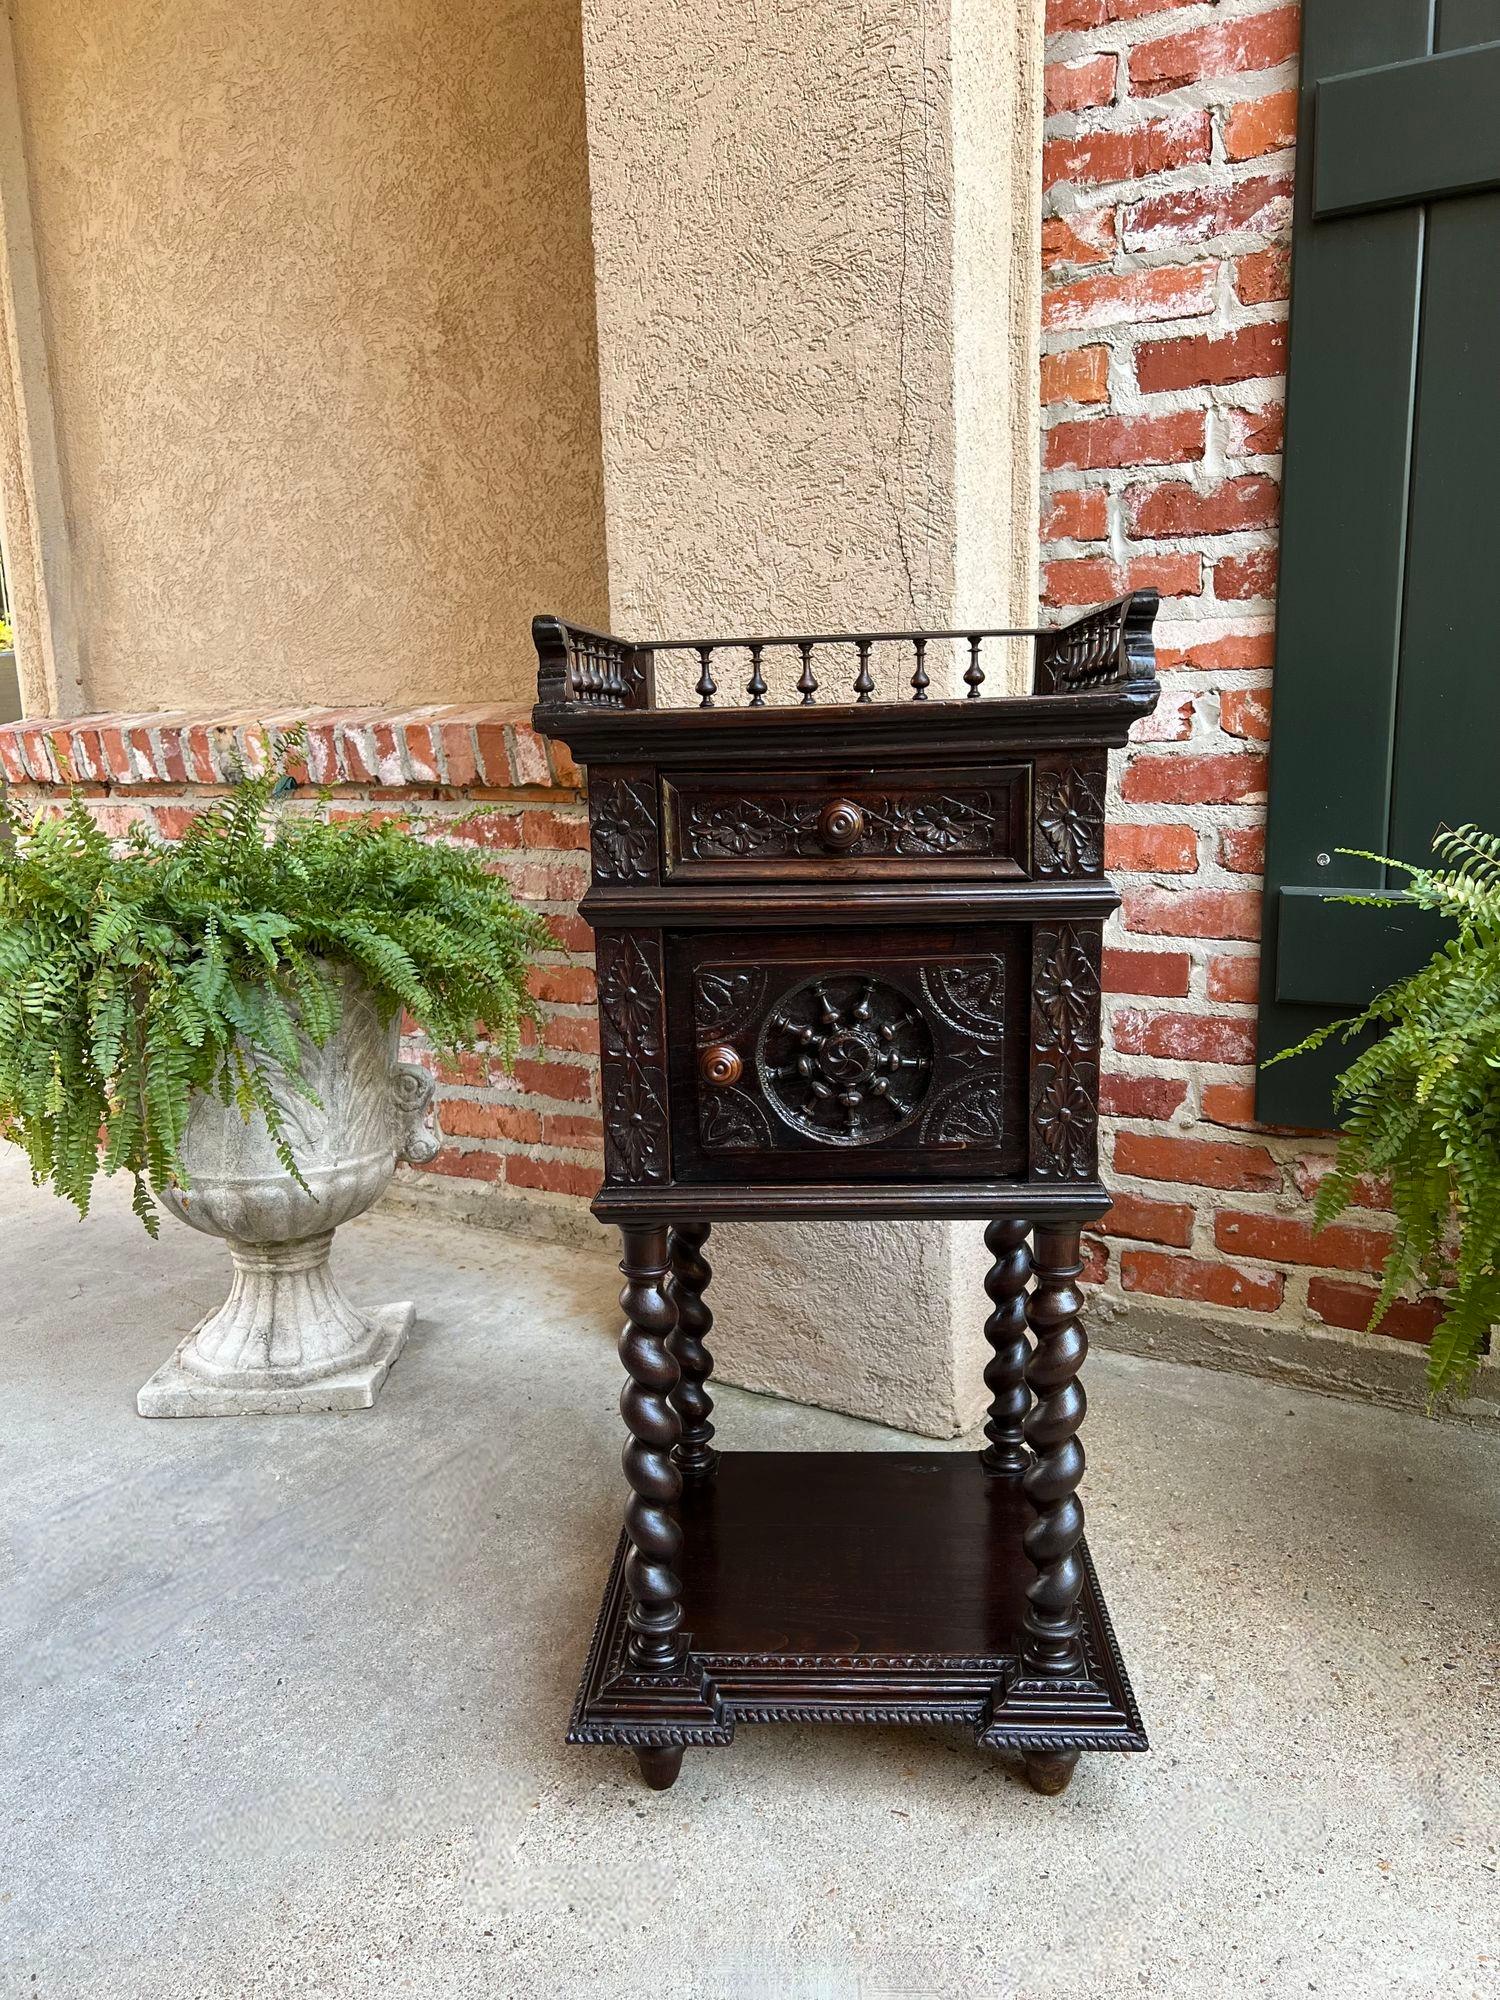 Antique French Nightstand Table Cabinet Brittany Breton Marble Barley Twist.

Direct from the Brittany region of France, a very ornate Breton carved nightstand cabinet or end table.
The gorgeous cabinet has lavish hand carvings throughout (on all 3